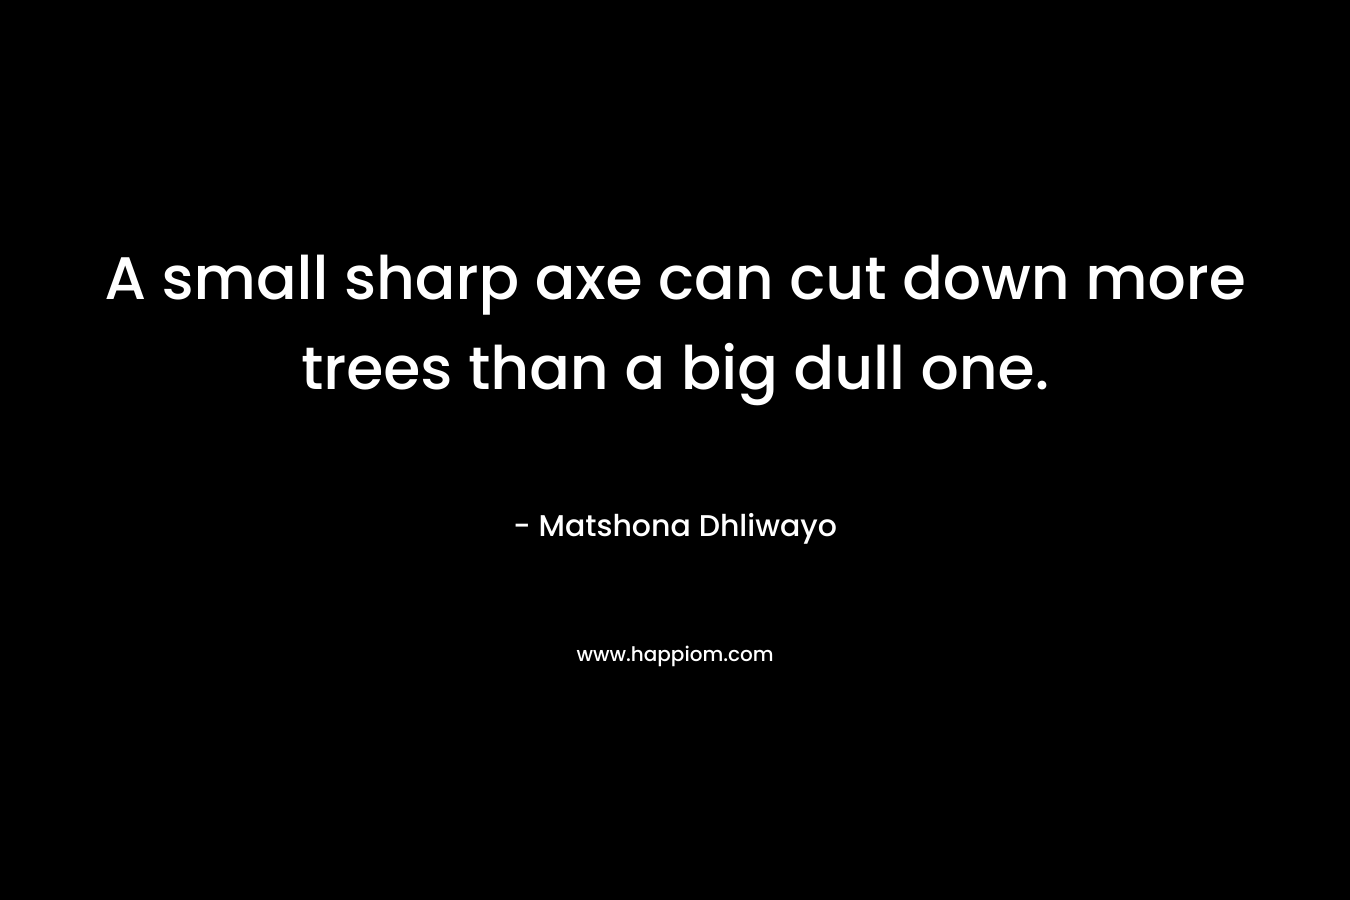 A small sharp axe can cut down more trees than a big dull one. – Matshona Dhliwayo